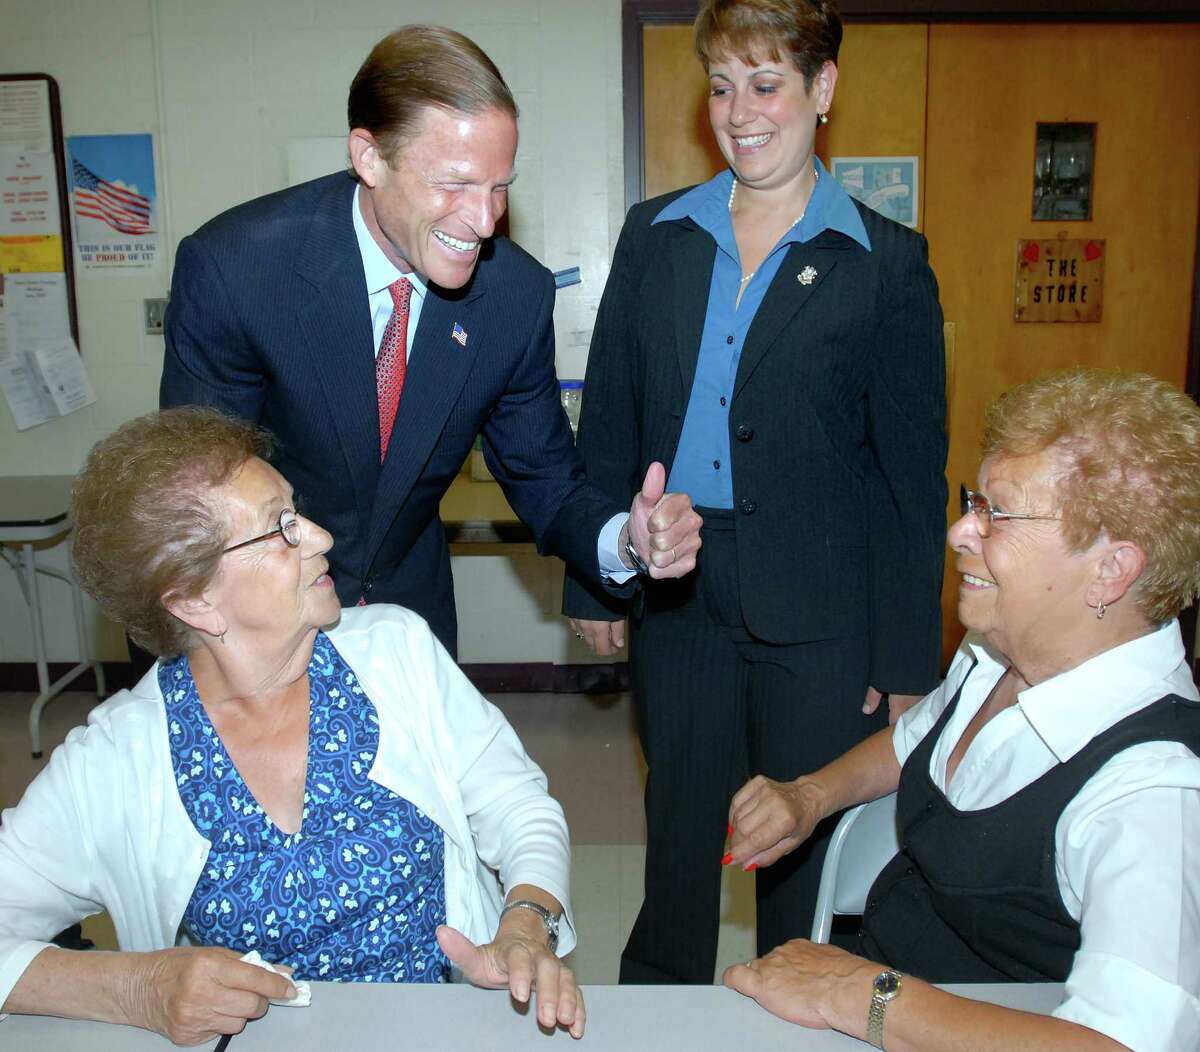 Attorney General Richard Blumenthal (top left) and East Haven Mayor Mayor April Capone Almon (top right) talk with Bridget Mathews (bottom left) and Sarah Cerilli (bottom right) of East Haven at the East Haven Community Center on 7/21/2010. Photo by Arnold Gold AG0378E